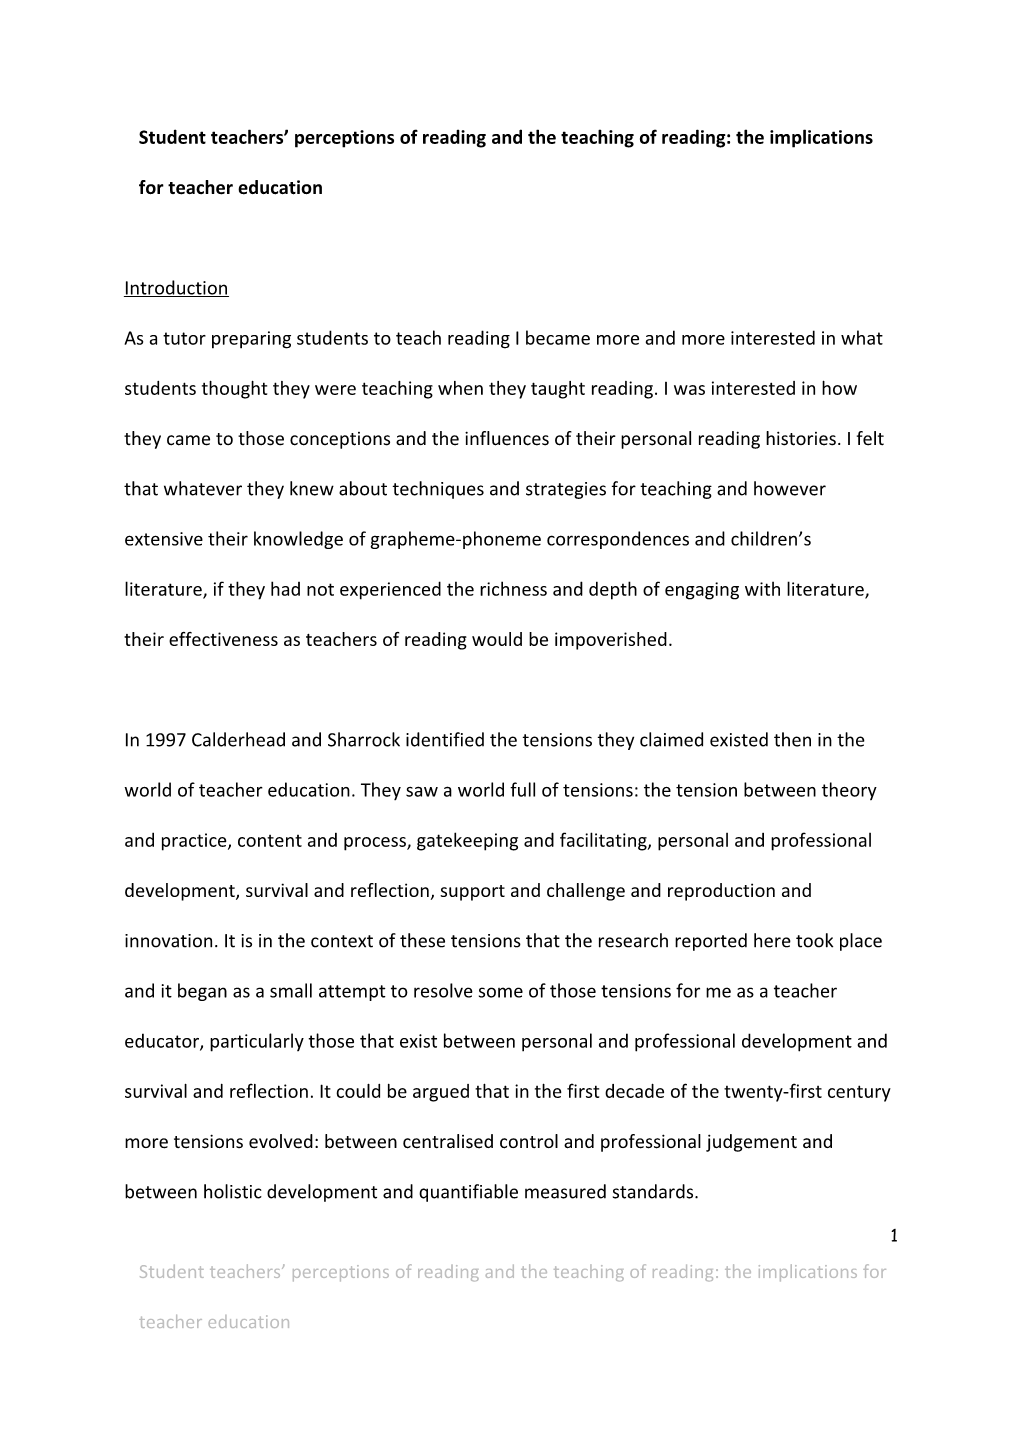 Student Teachers Perceptions of Reading and the Teaching of Reading: the Implications